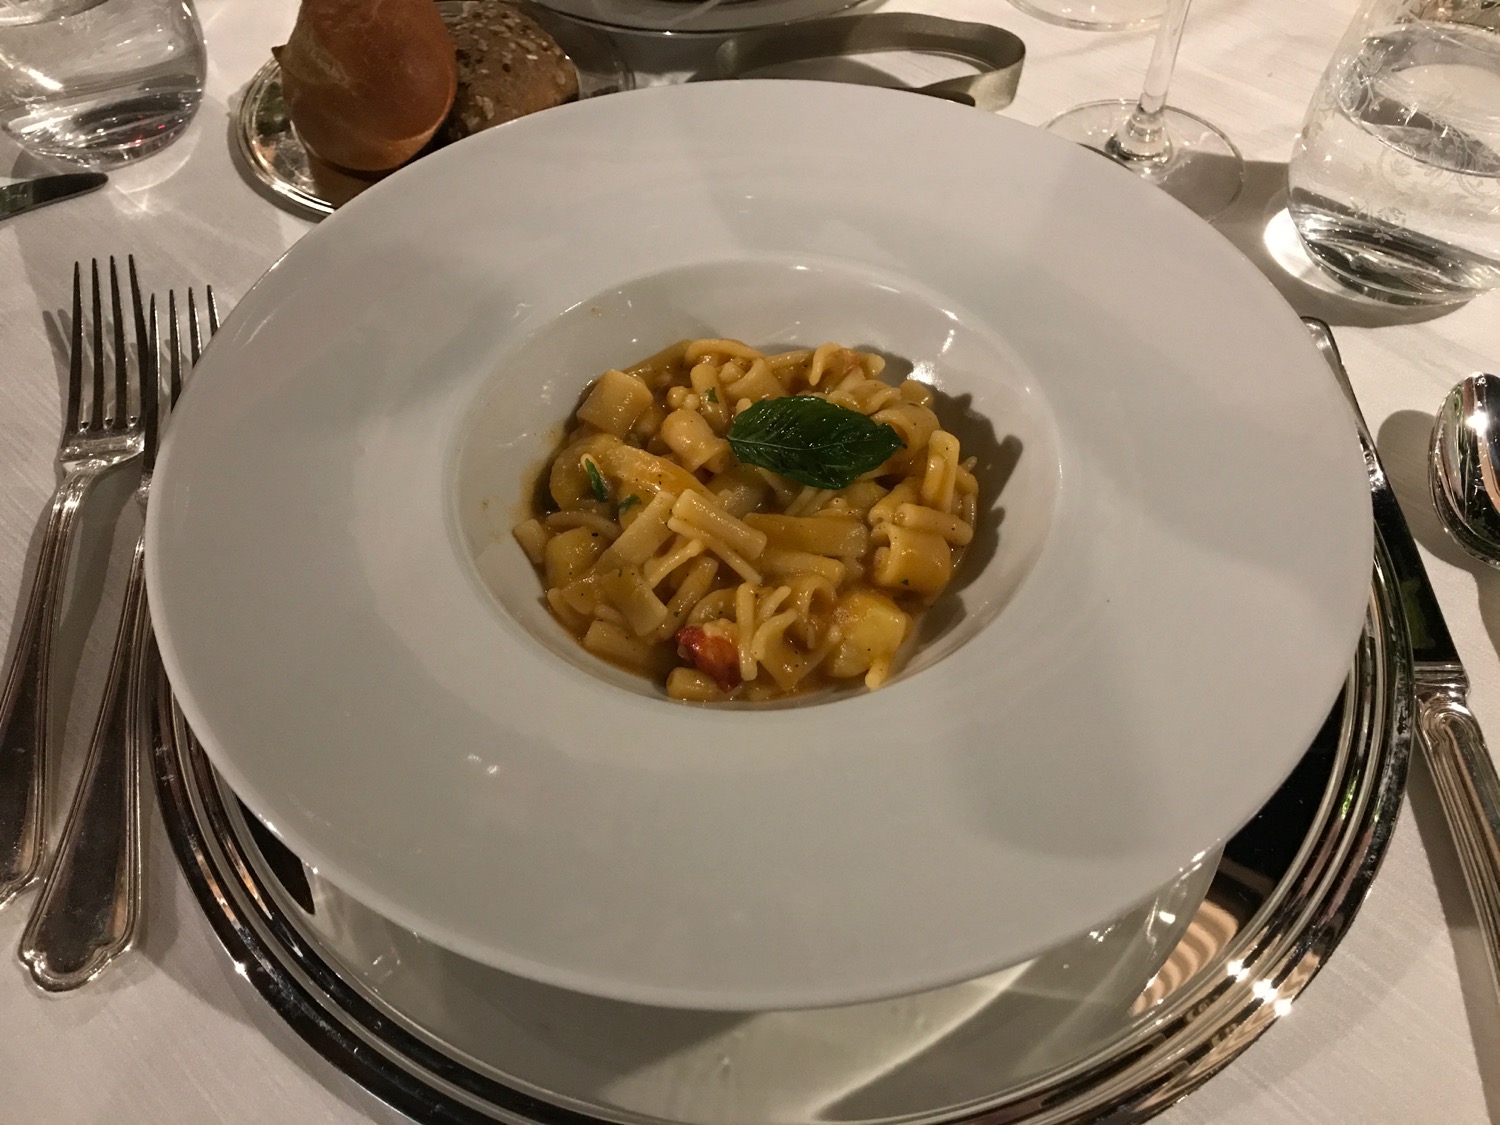 a plate of pasta and vegetables